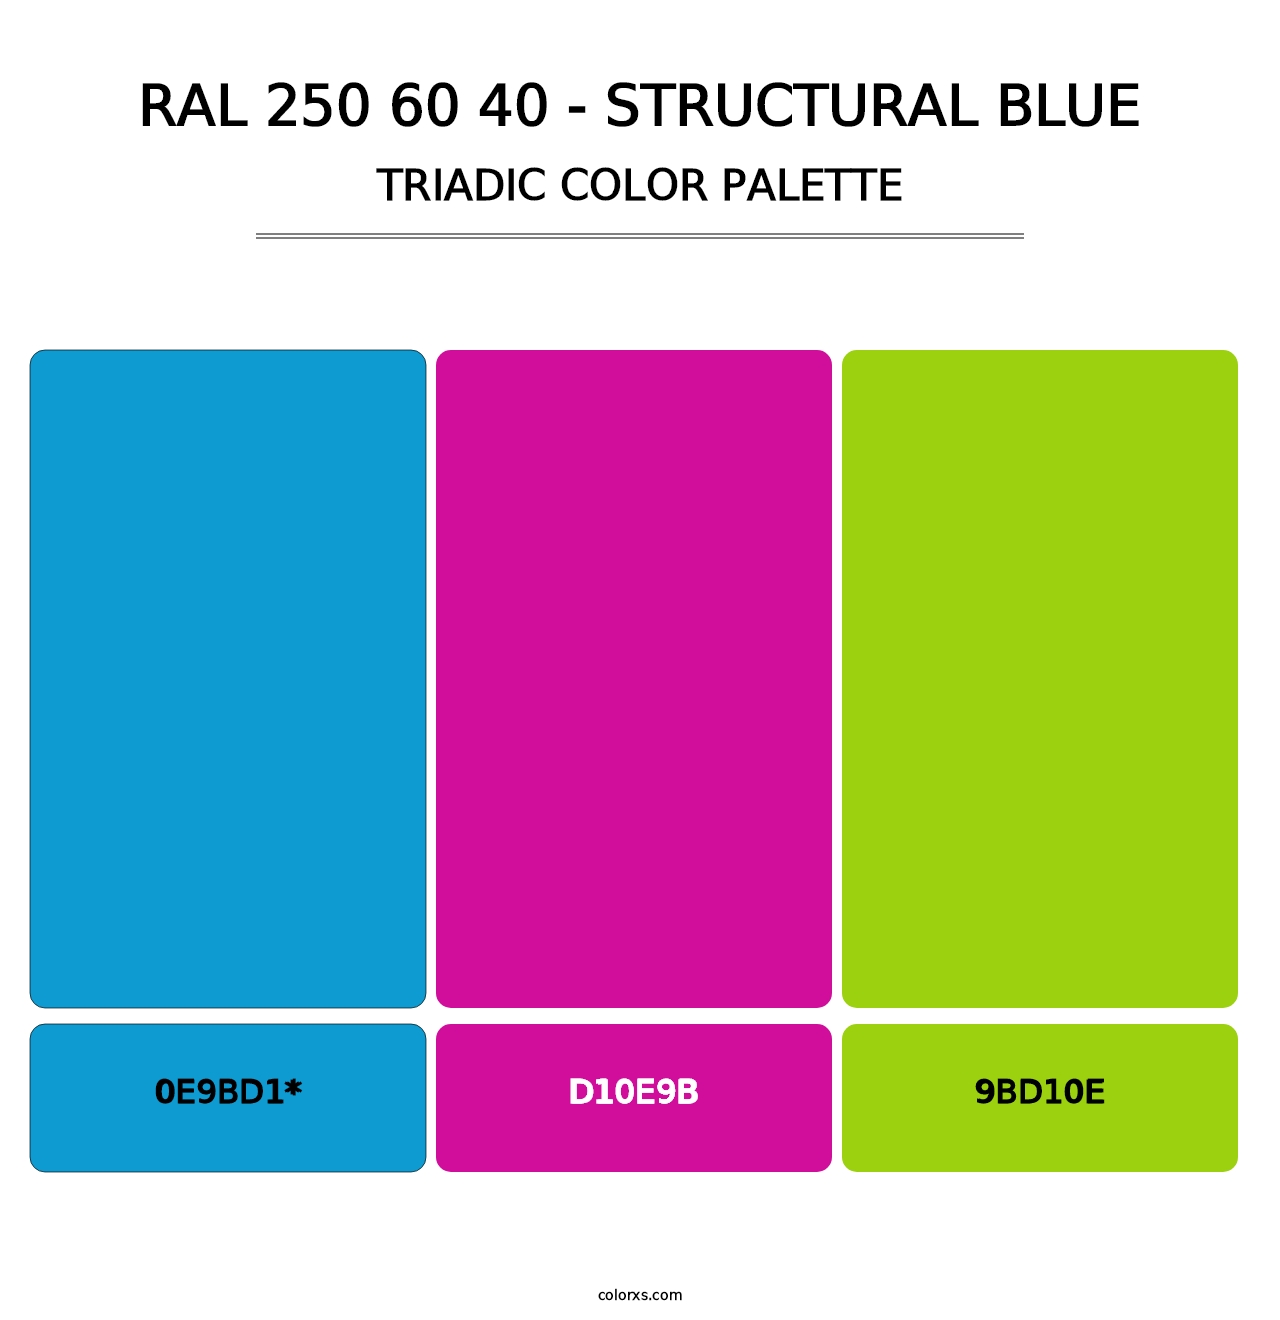 RAL 250 60 40 - Structural Blue - Triadic Color Palette